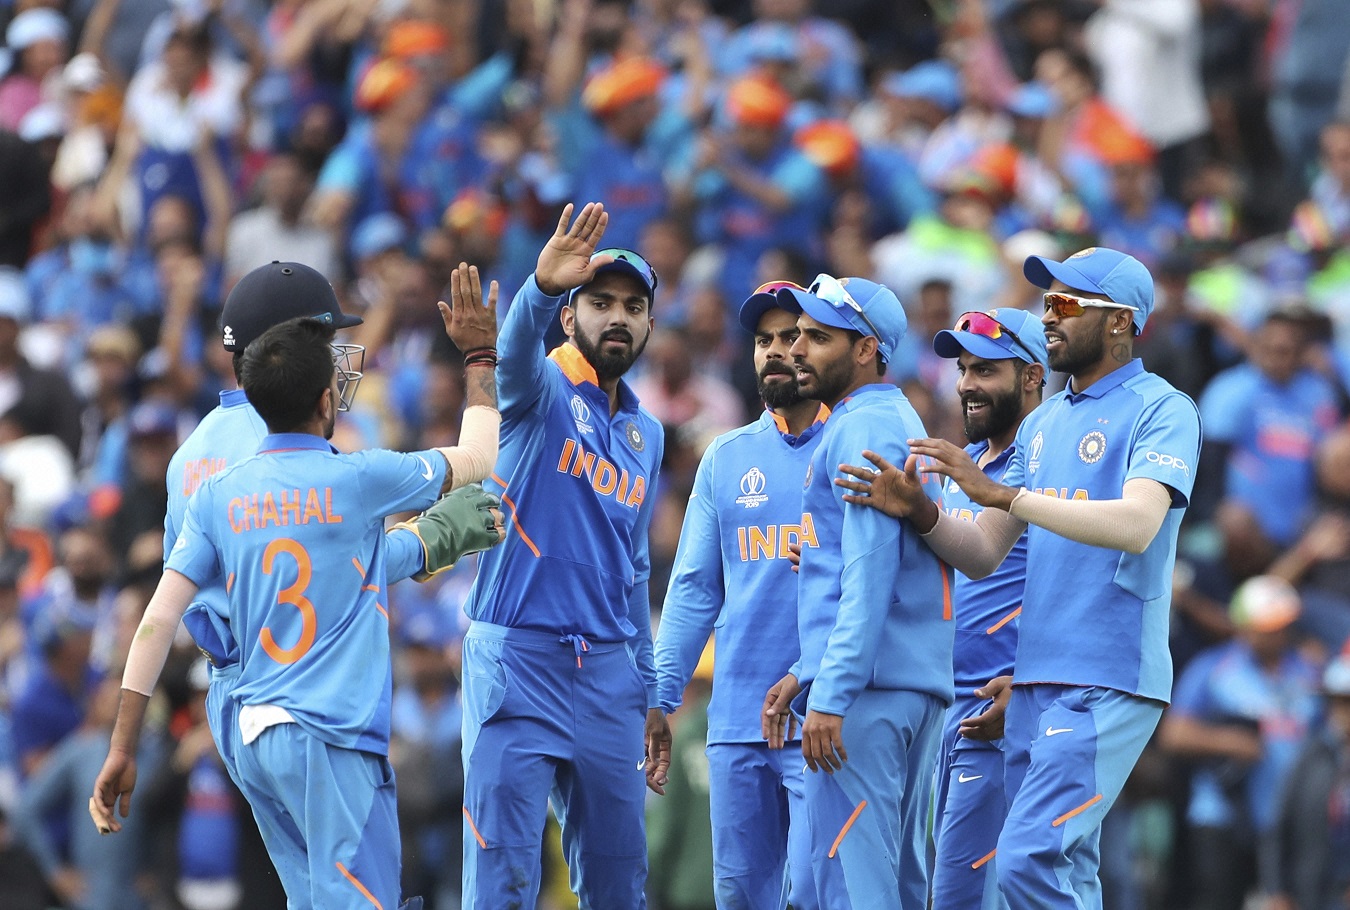 In clash of titans, India hand Aussies their first defeat in WC-2019